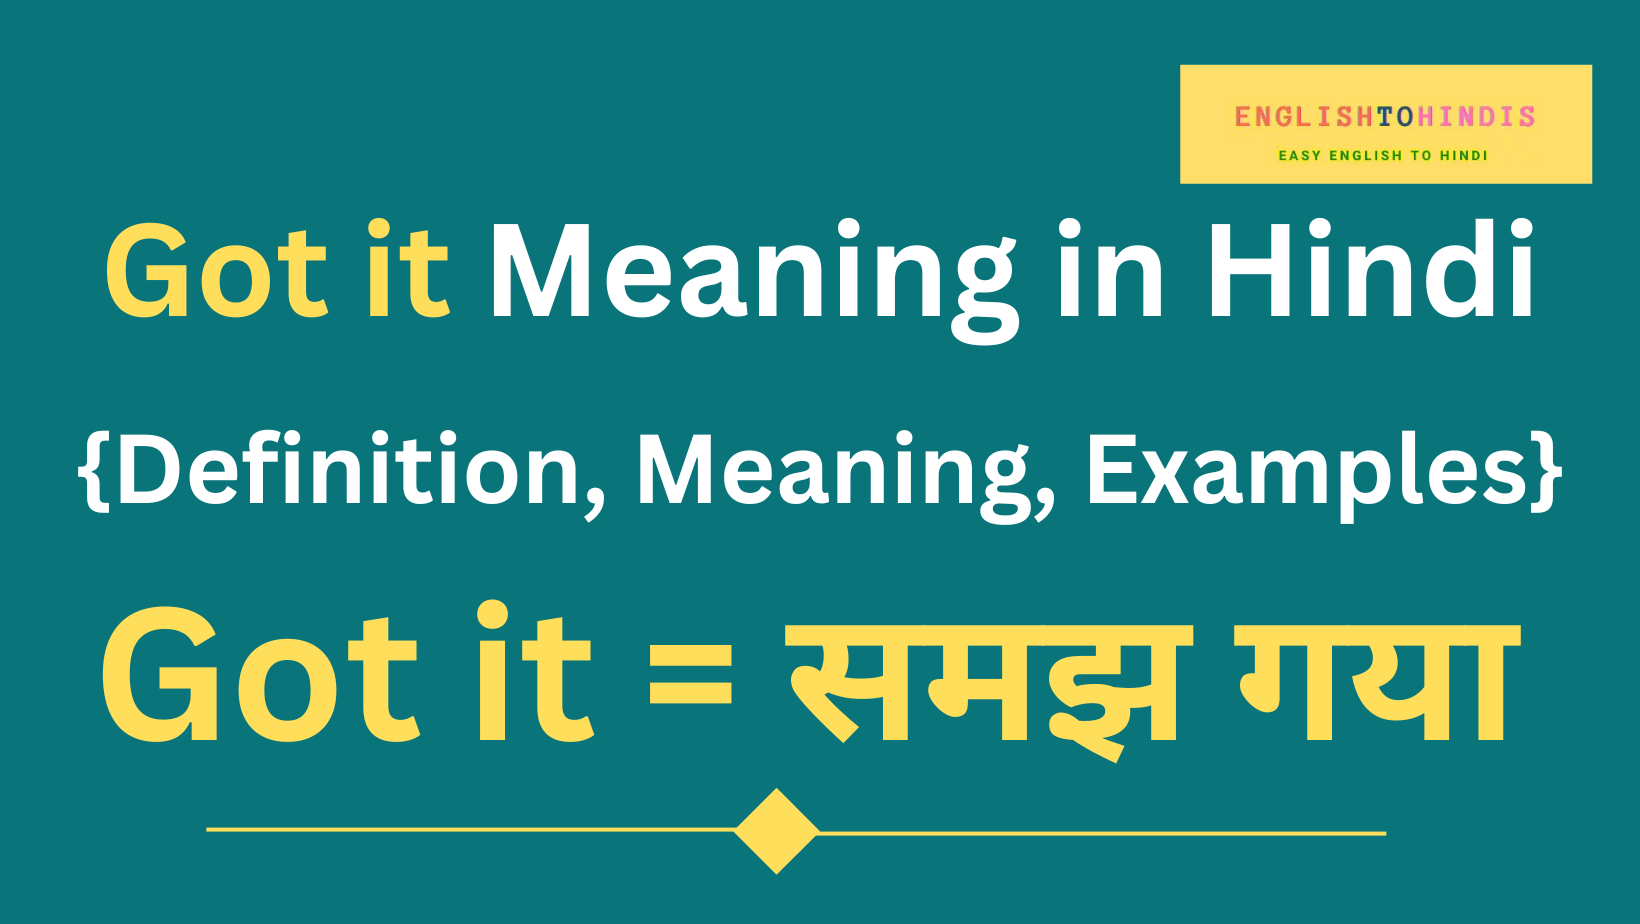 Got it Meaning in Hindi